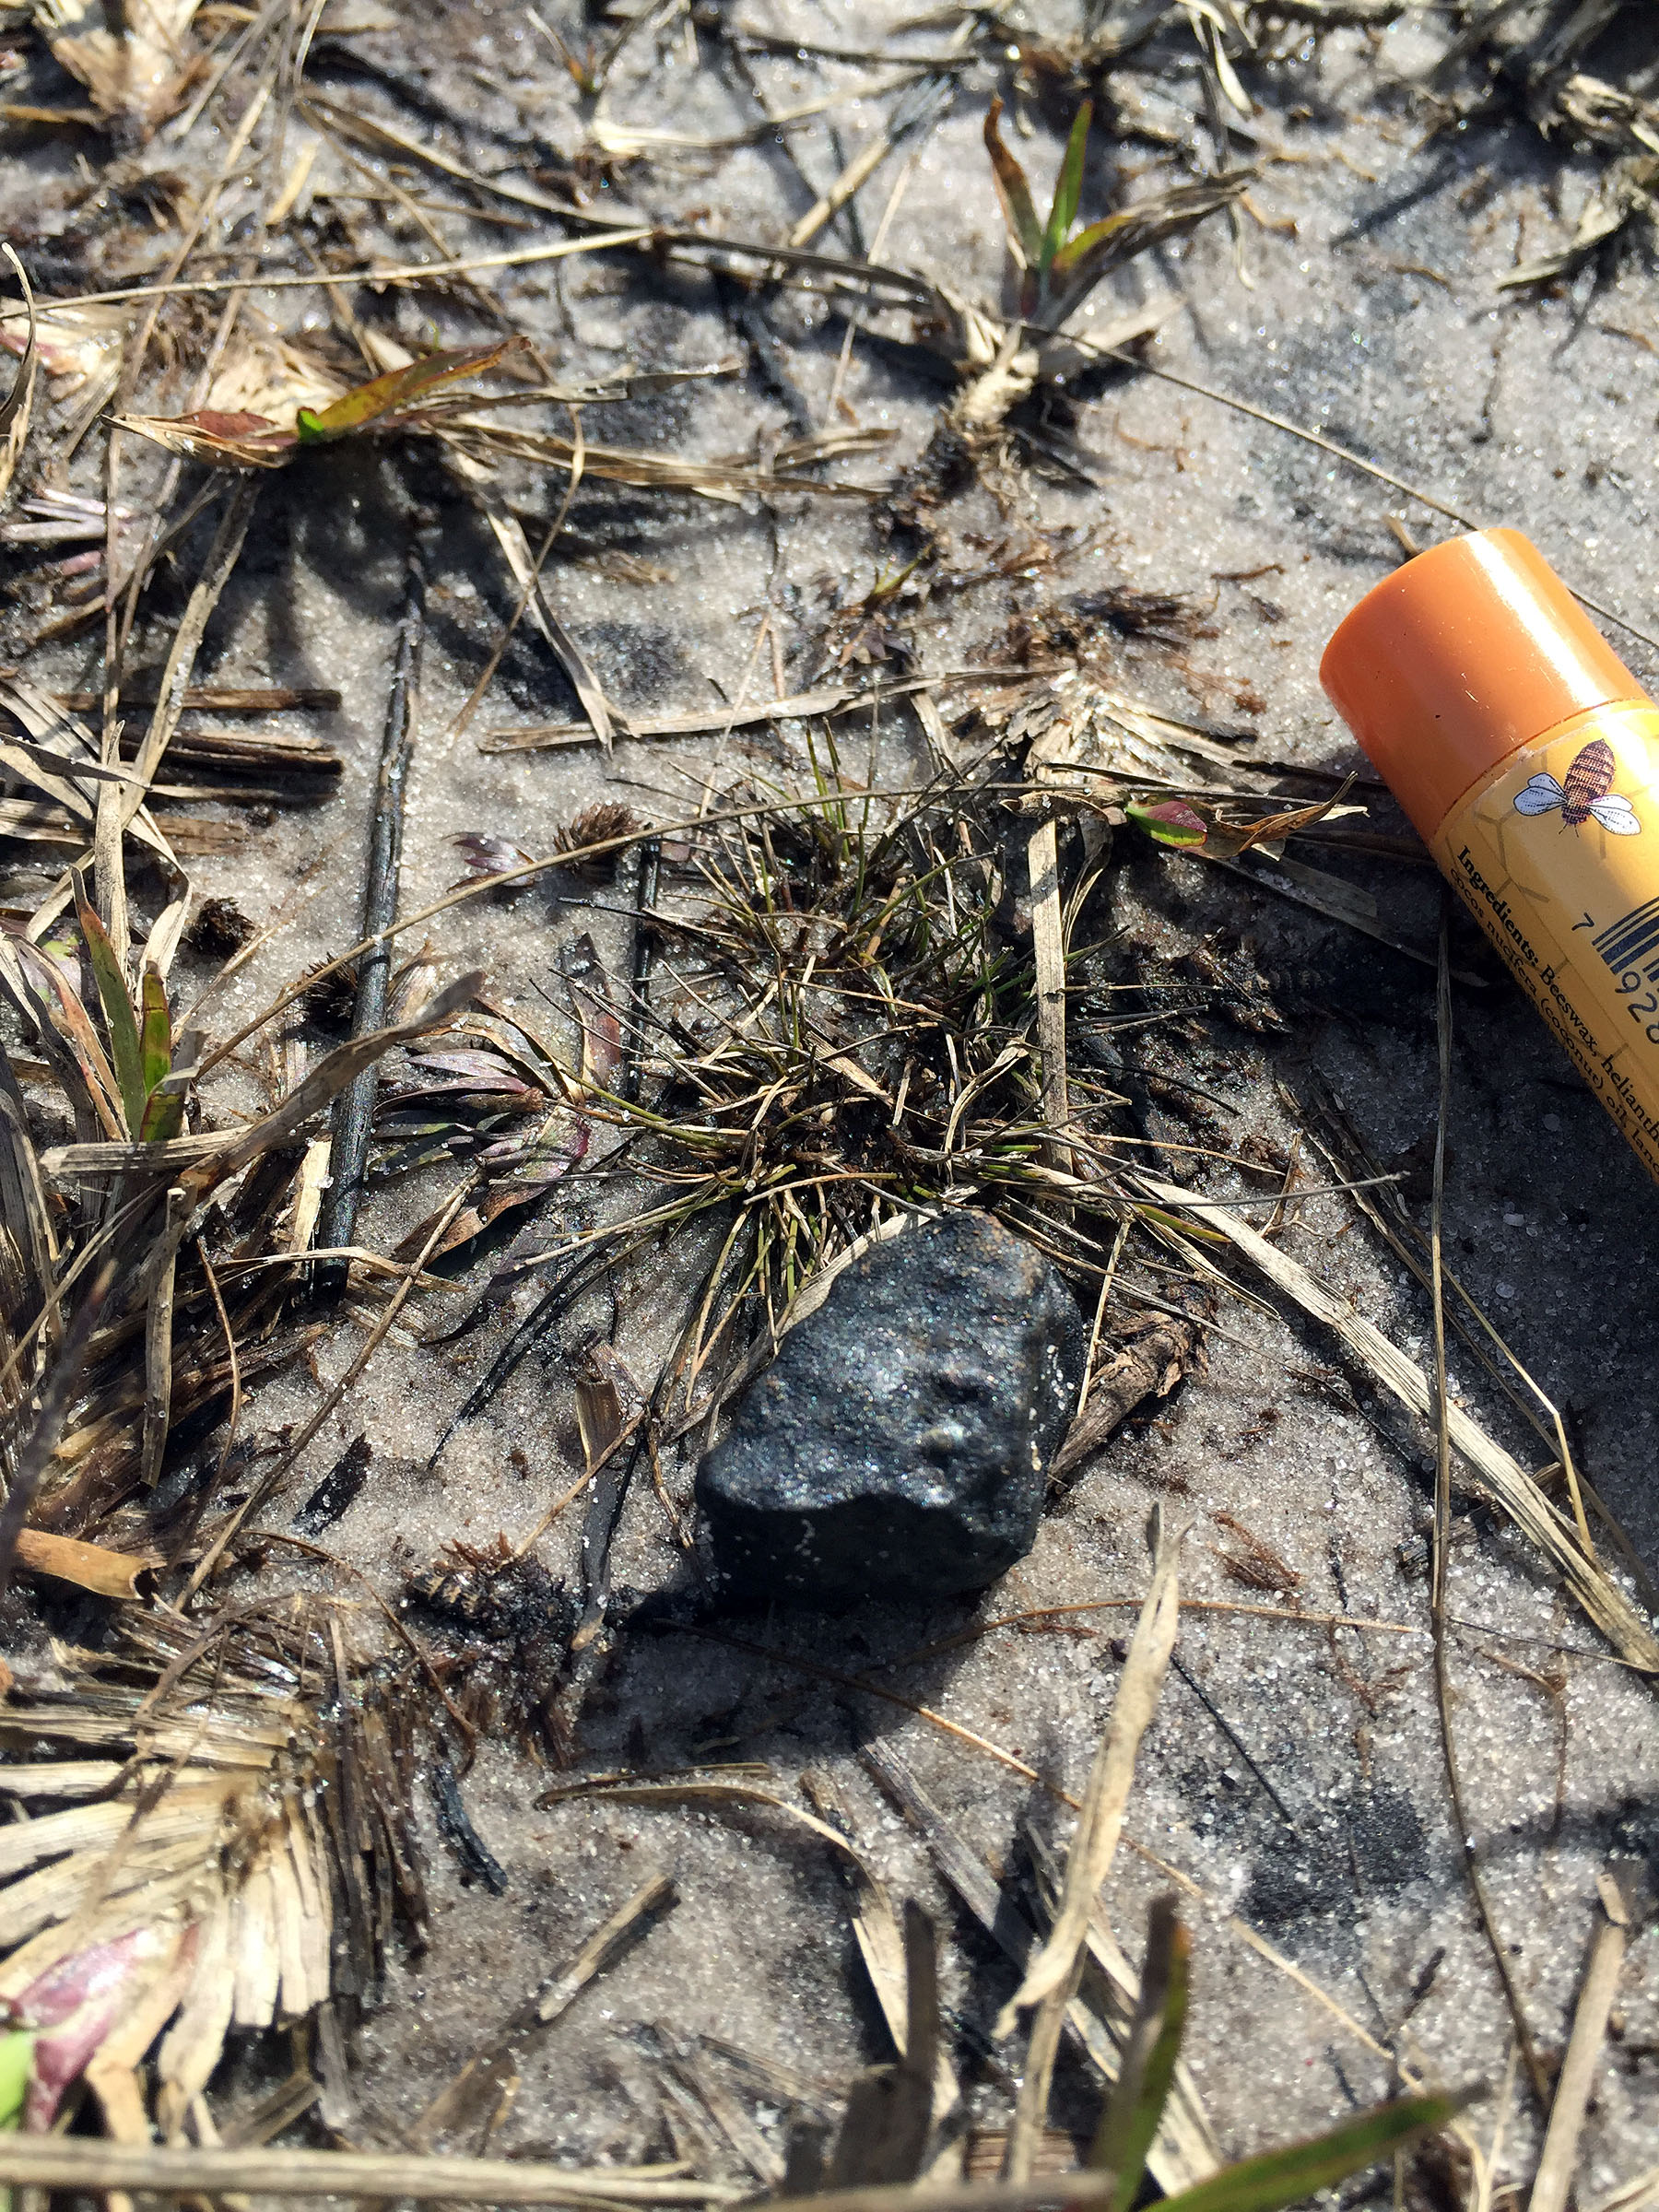 Meteorite Hunters Find 6 Space Rocks from Florida Fireball